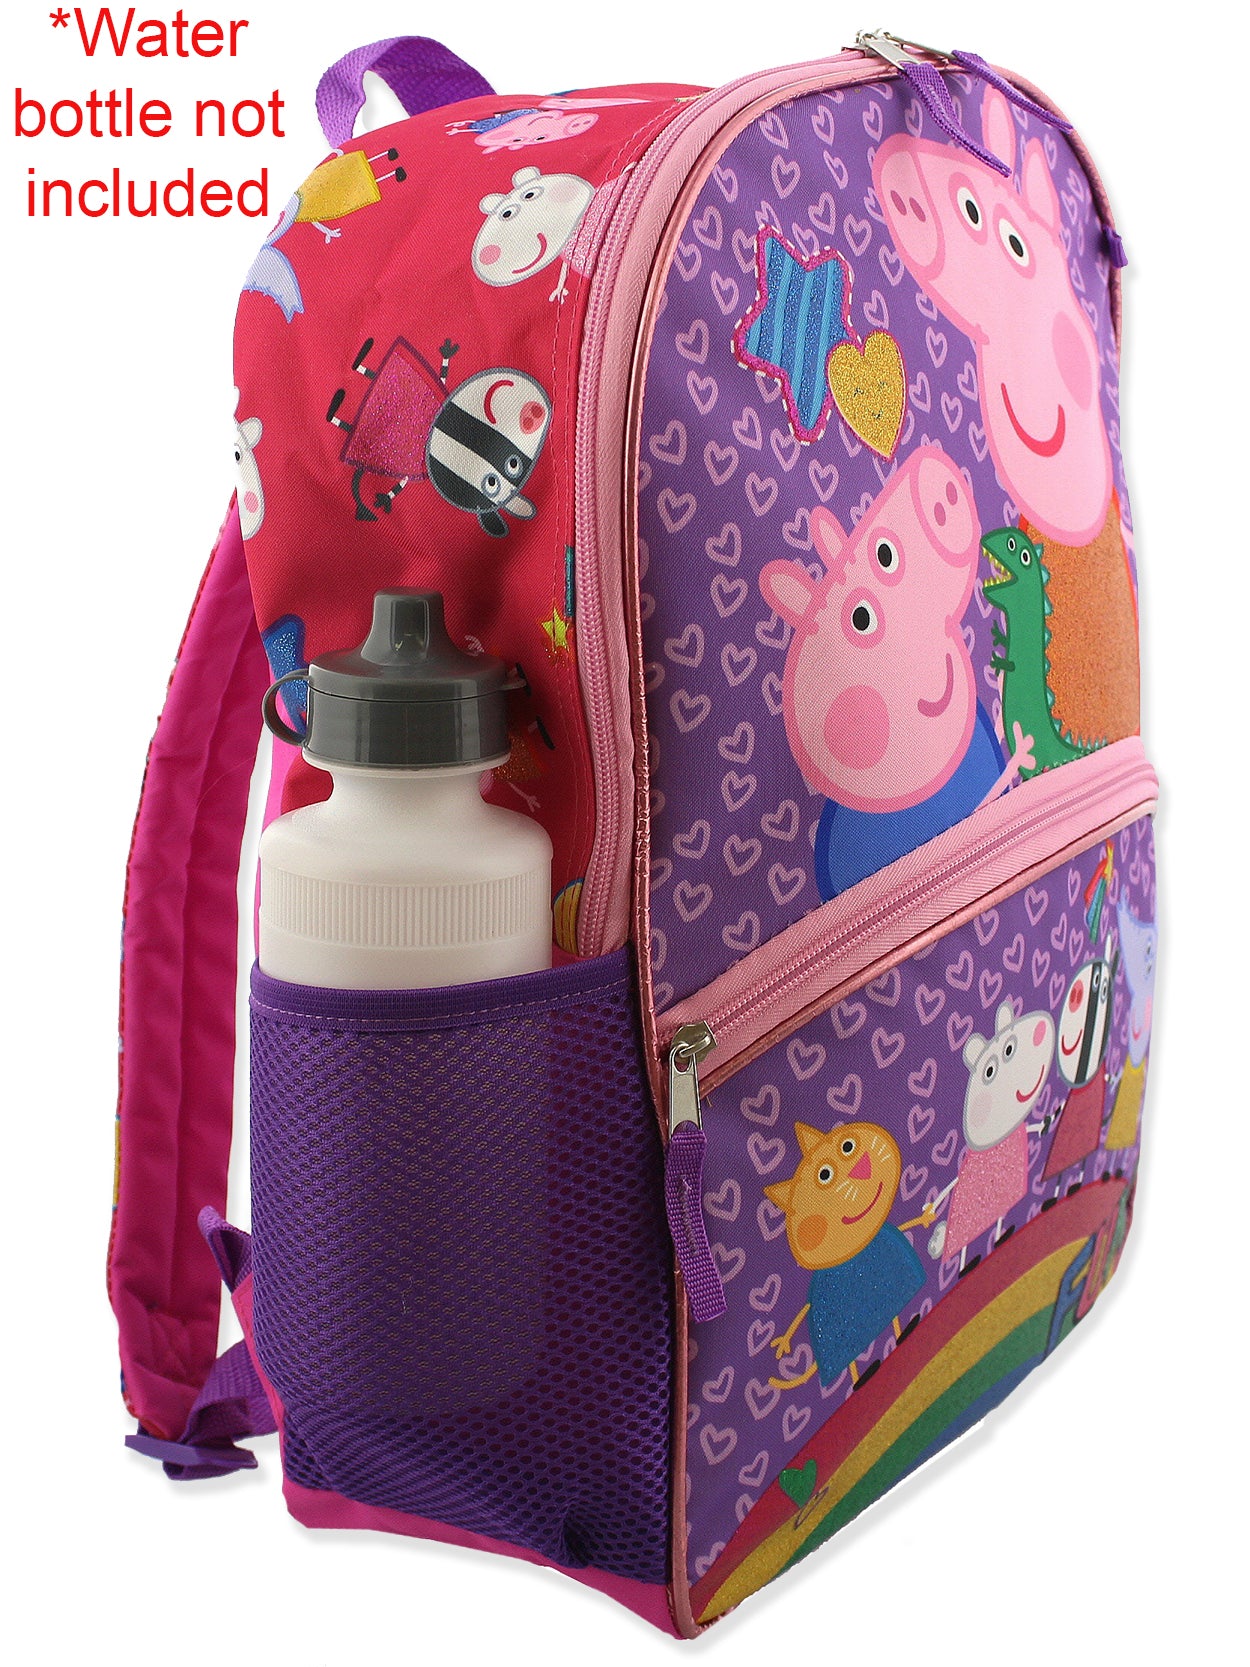 Peppa Pig Girls 5 Piece Backpack and Lunch Bag School Set (One size, Pink/Purple)